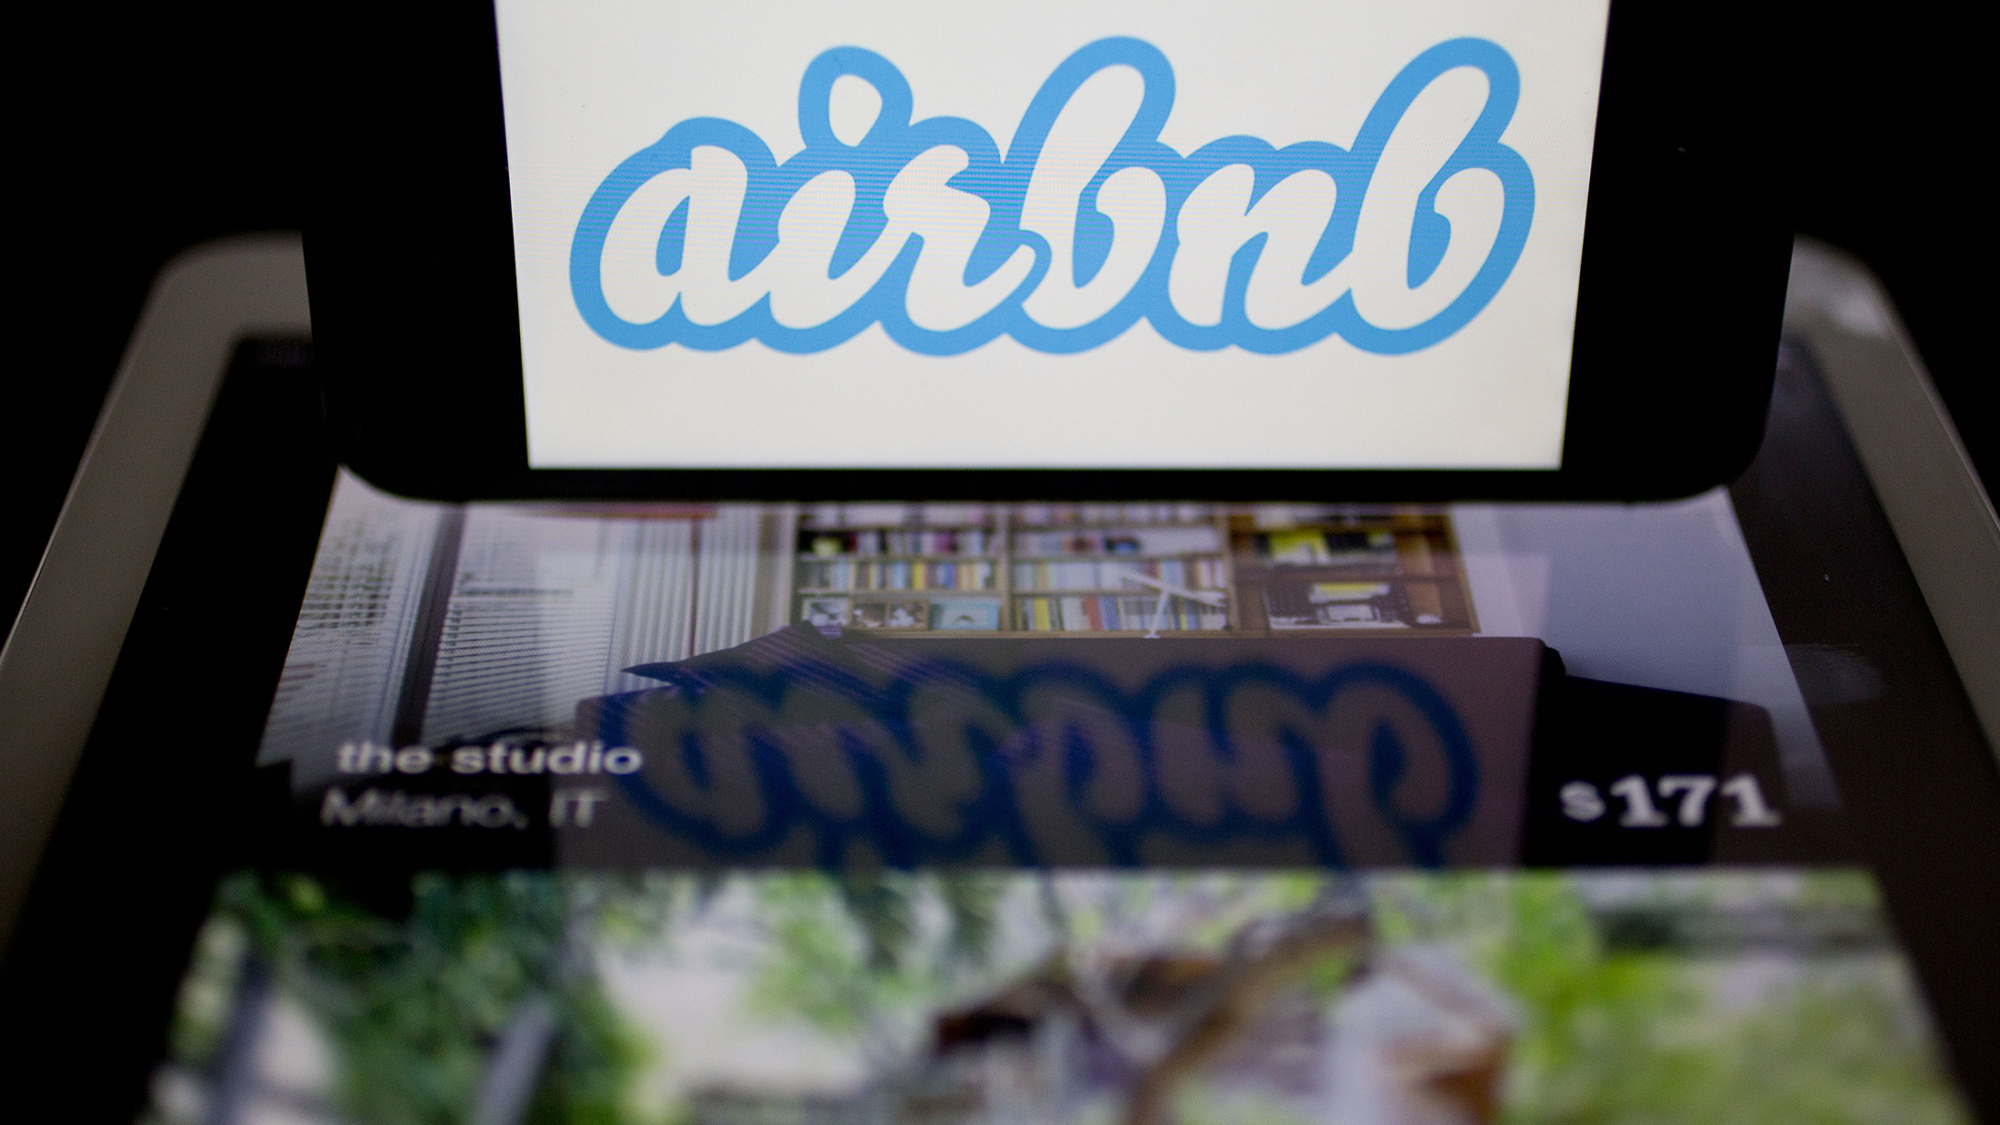 Airbnb Unveils New Tools to Help Travelers Find the Best Listings